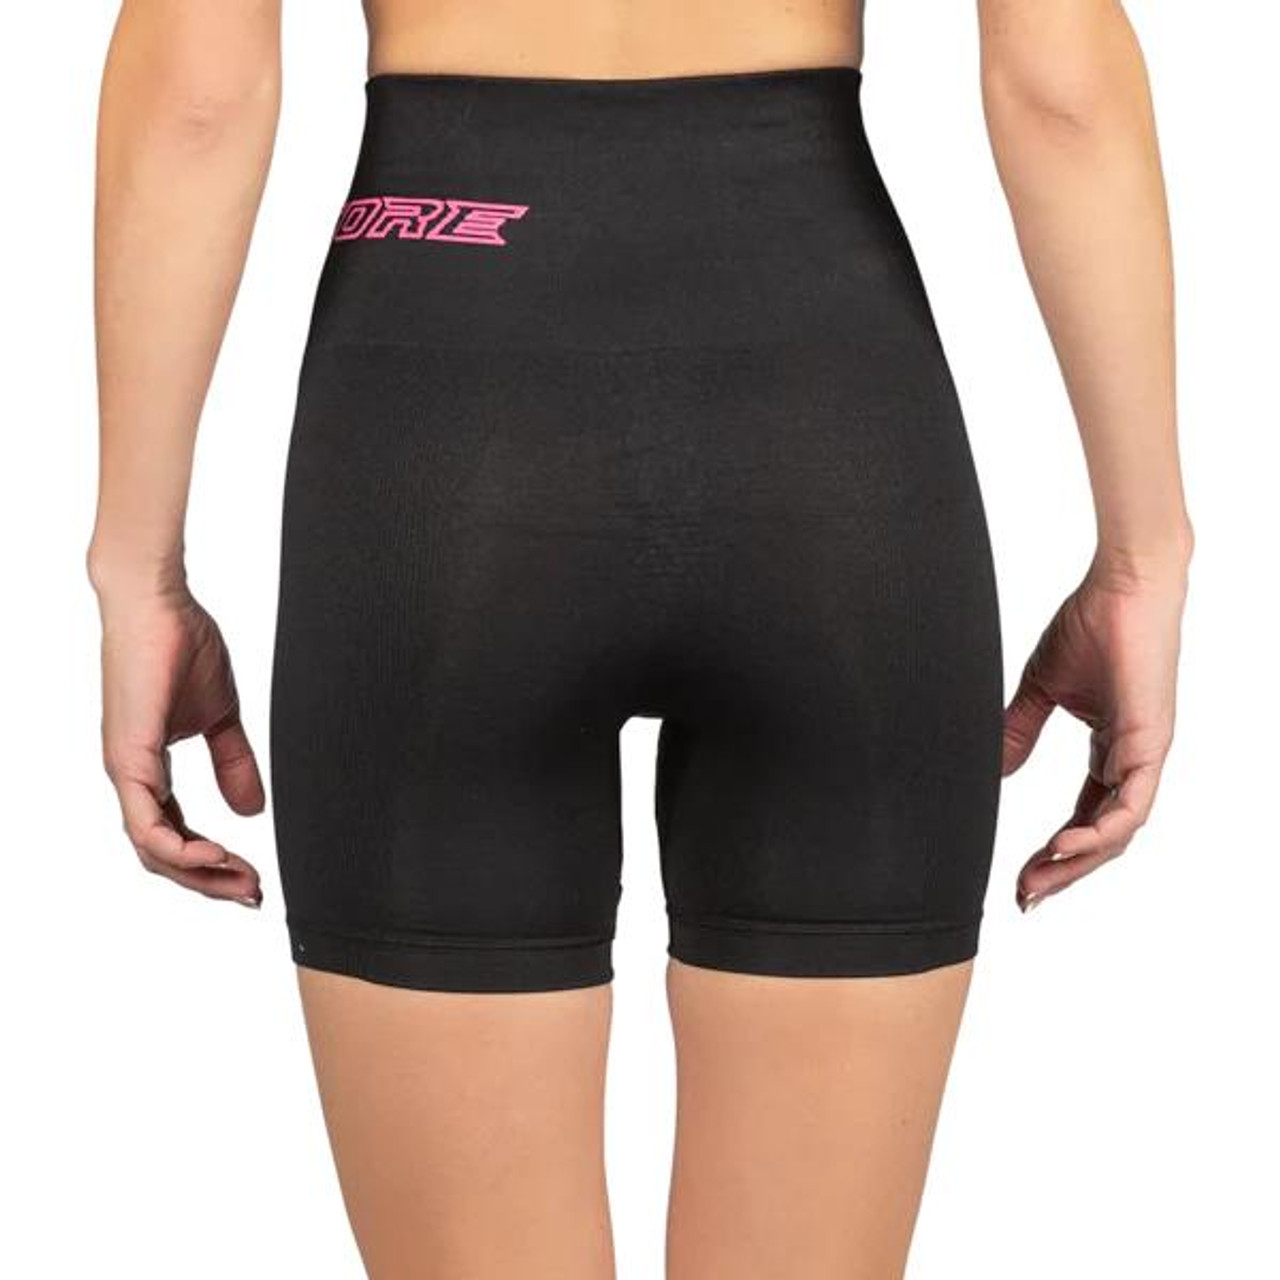 Women's Groin/osteitis pubis - patented medical grade compression shor –  Supacore